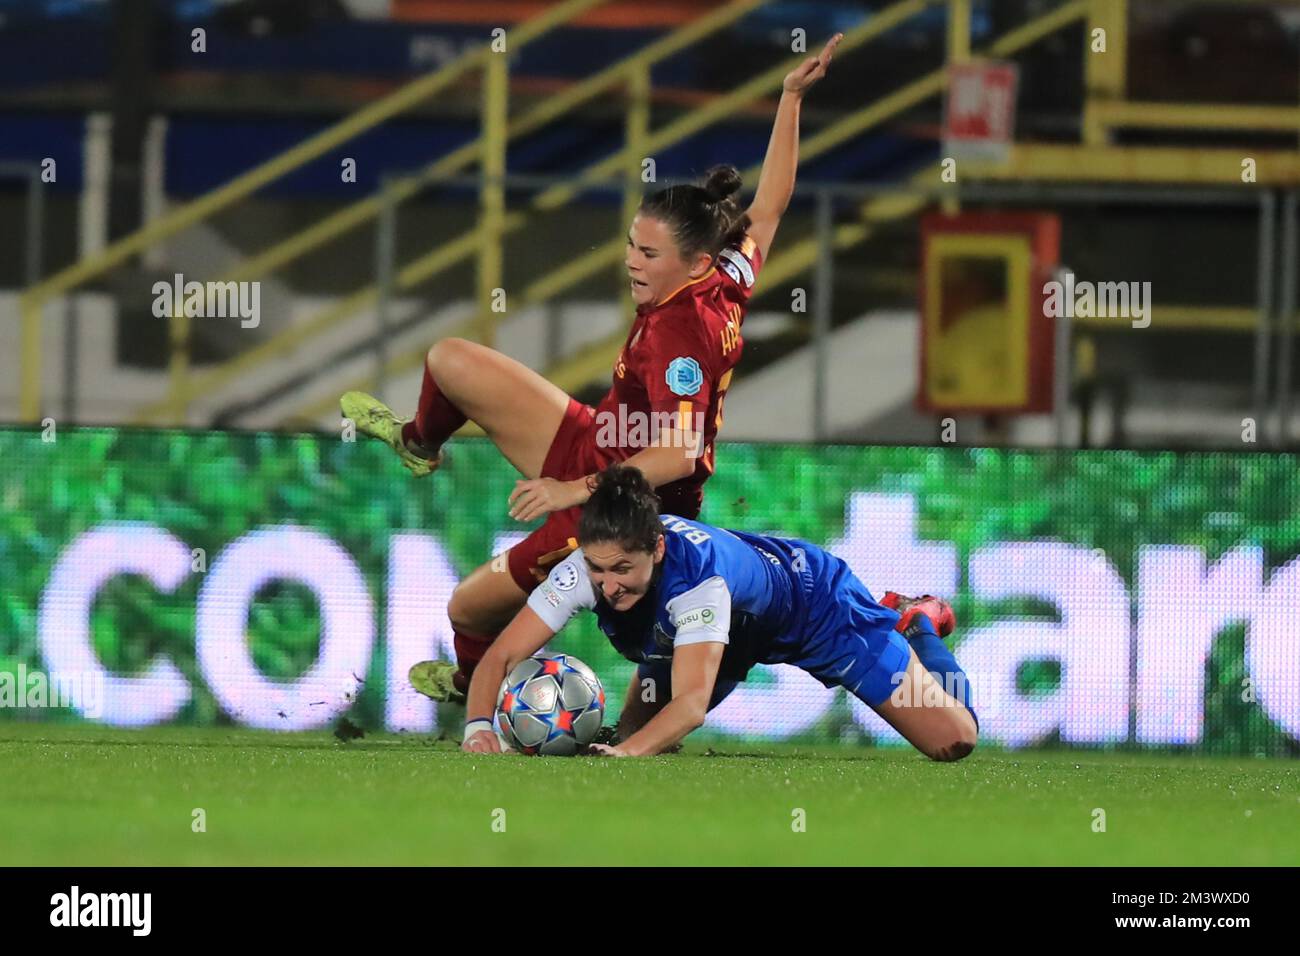 Emilie Haavi (AS Roma) is stopped by  during the UEFA Womens Champions League group match AS Roma vs SKN St Polten at Stadio Comunale Domenico Francioni, Latina  (Tom Seiss/ SPP) Stock Photo